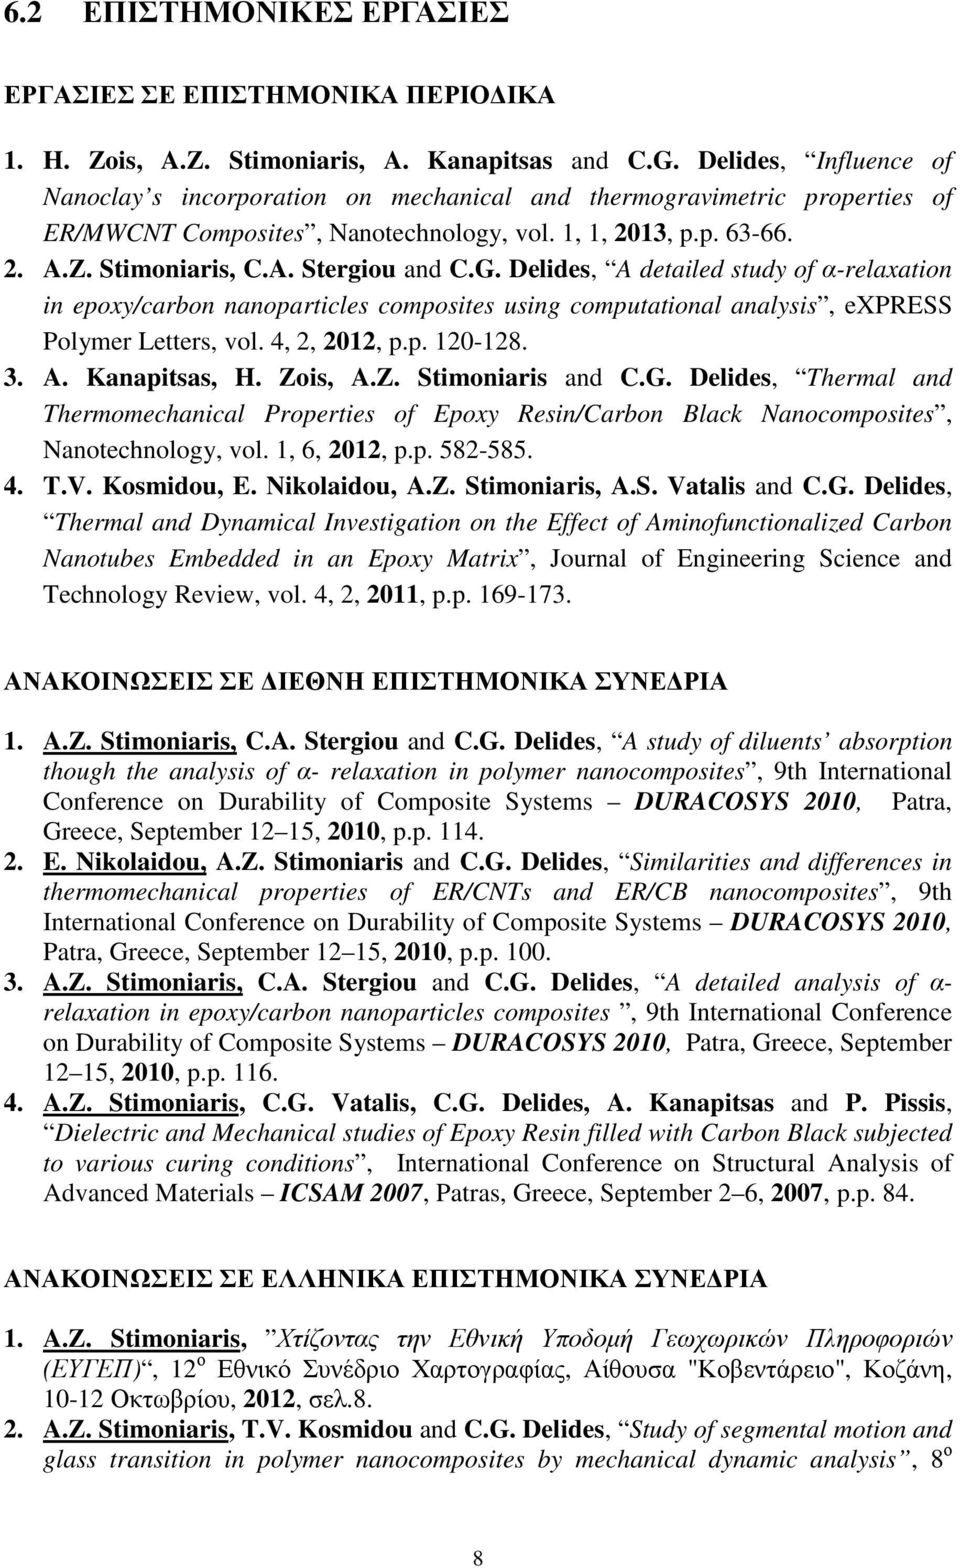 G. Delides, A detailed study of α-relaxation in epoxy/carbon nanoparticles composites using computational analysis, express Polymer Letters, vol. 4, 2, 2012, p.p. 120-128. 3. A. Kanapitsas, H.